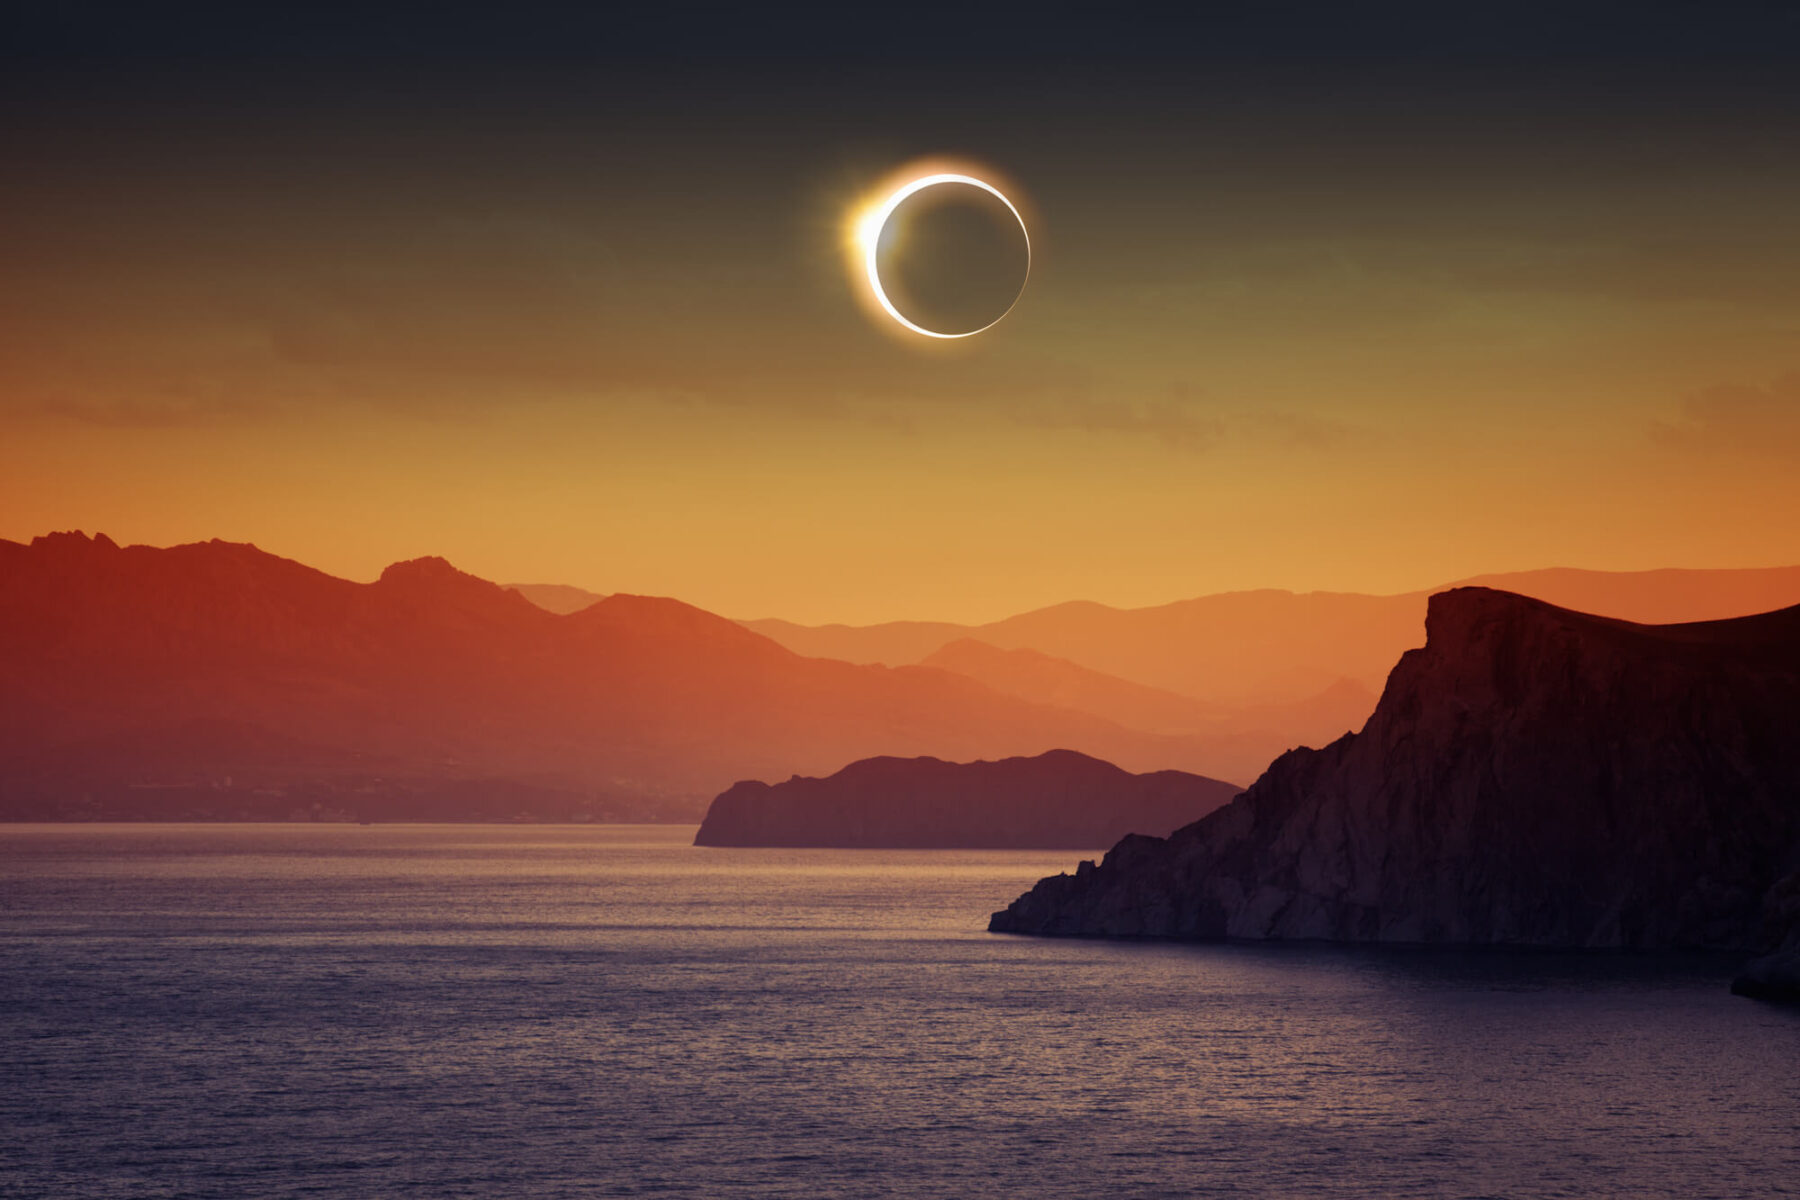 solar-eclipse-over-mountains-astk